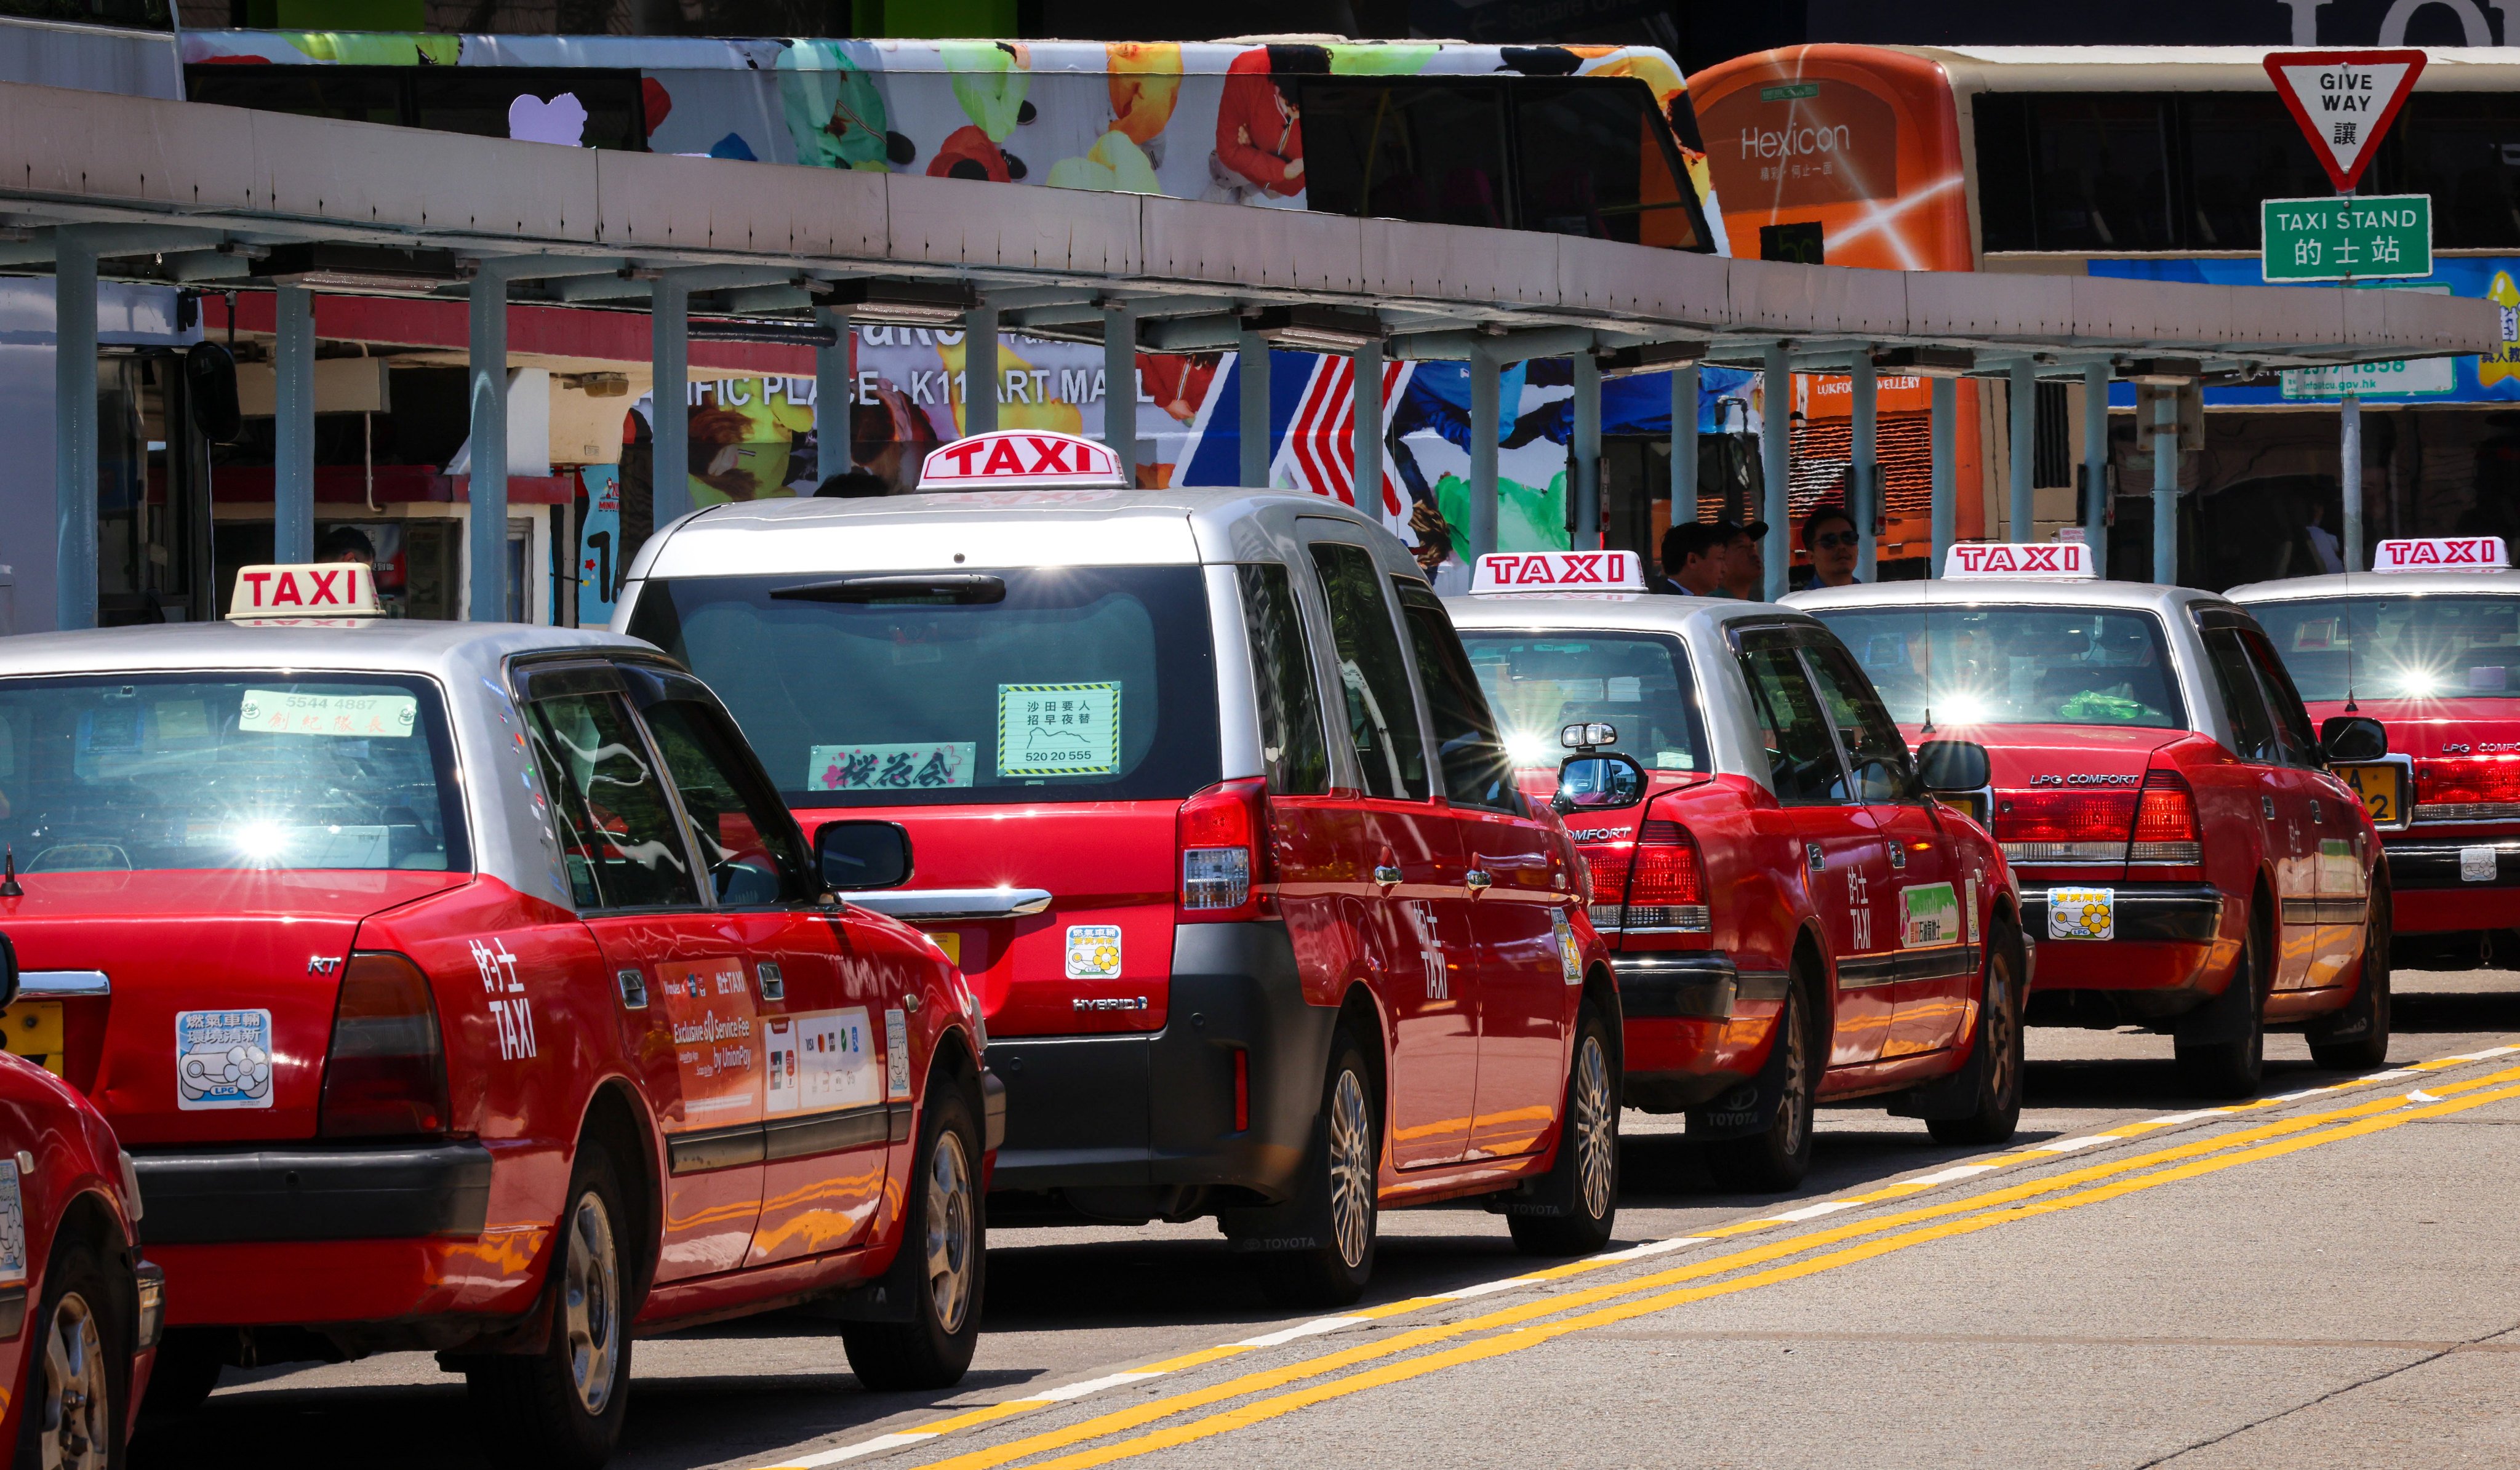 Hong Kong’s taxi trade has long been accused of poor service. Photo: Jelly Tse